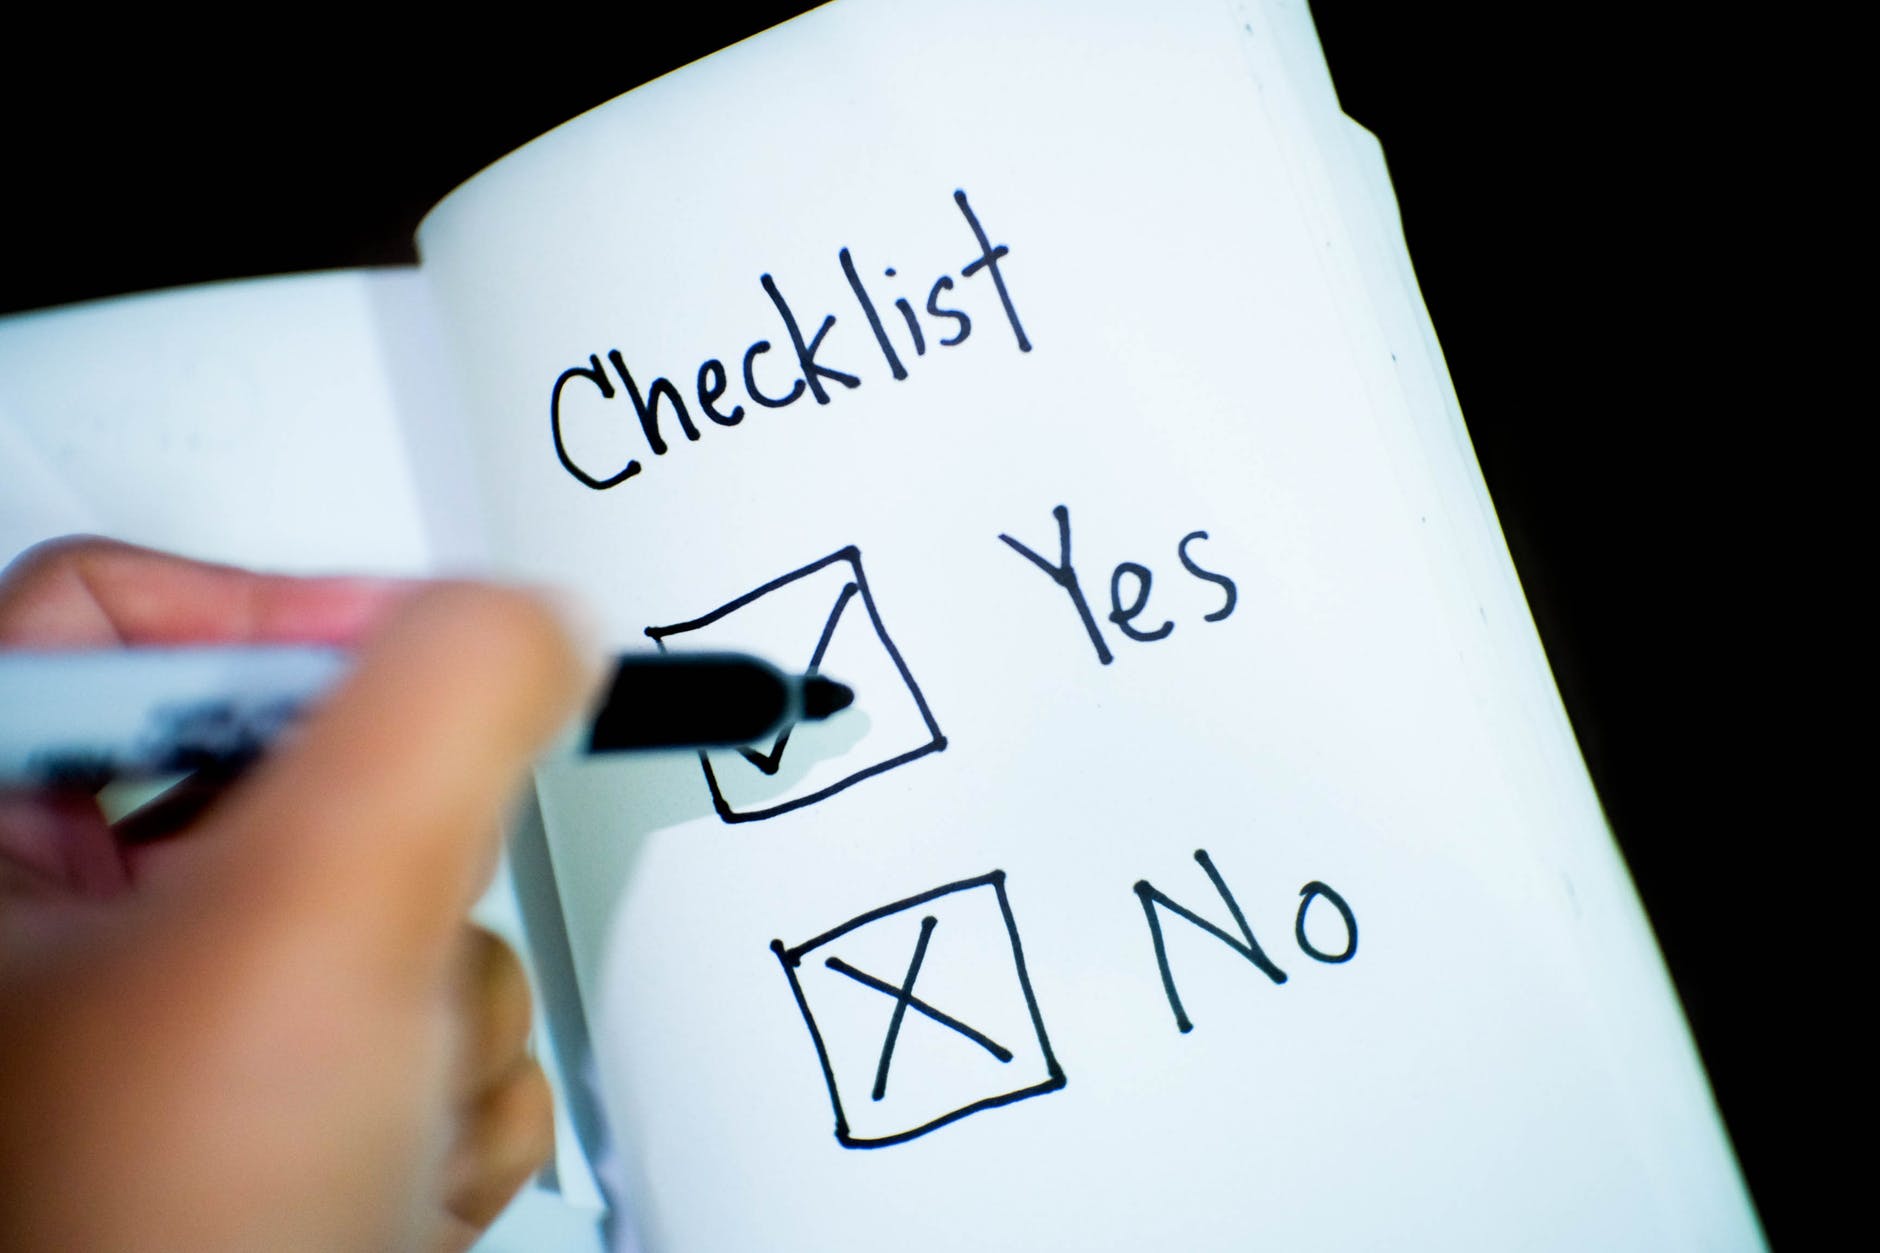 Checklist in a notebook with two options: yes or no